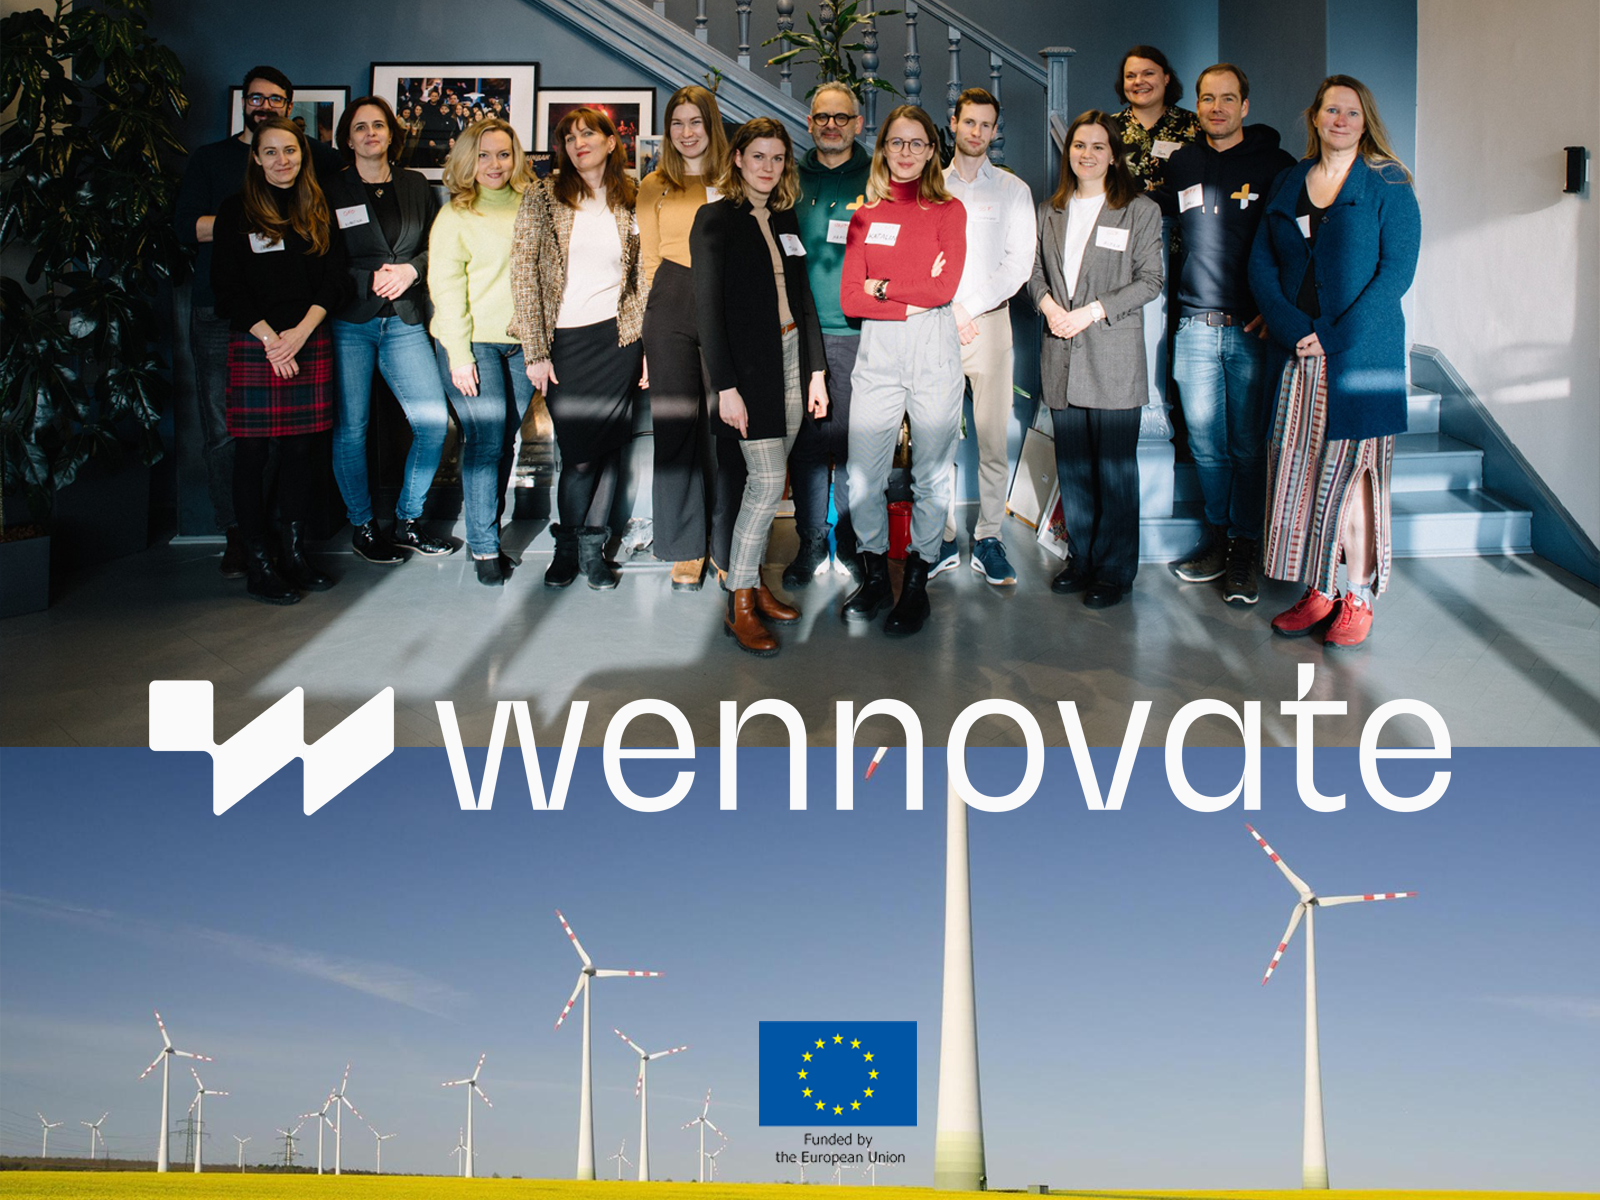 First meeting to launch the WEnnovate project as a member of the project team.